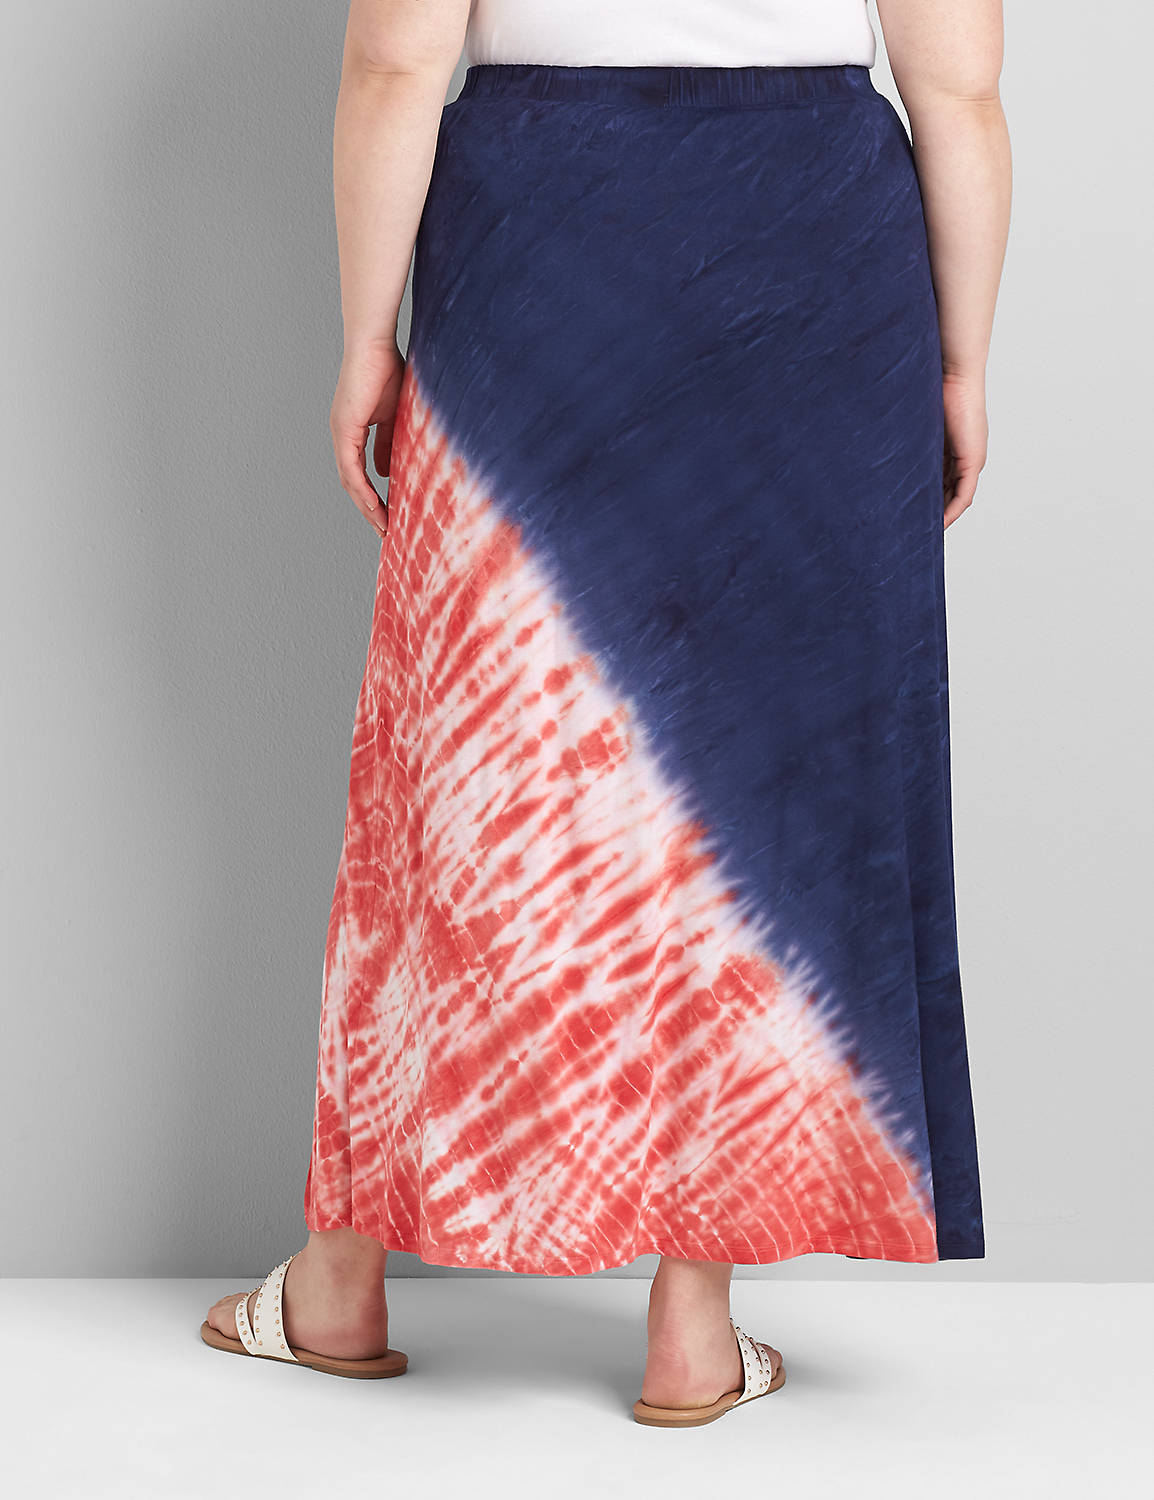 Tie-Dye Maxi Skirt Product Image 2